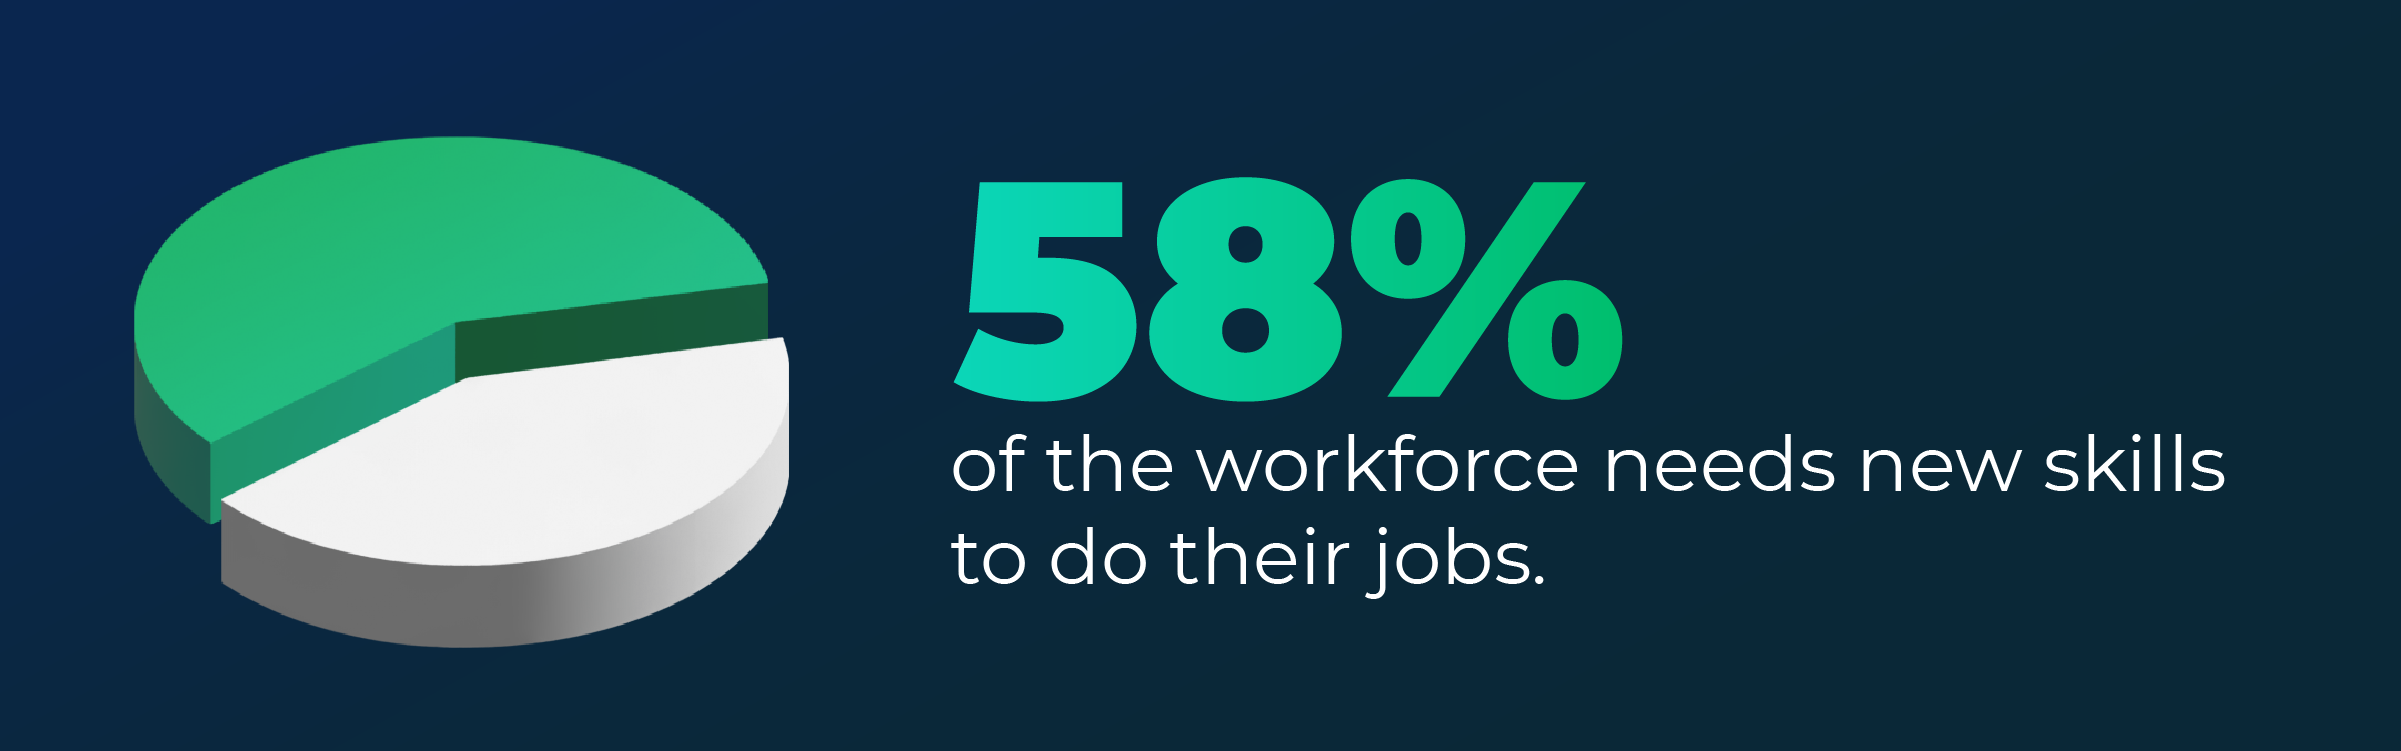 Graphic showing that 58% of employees need new skills to do their jobs successfully.